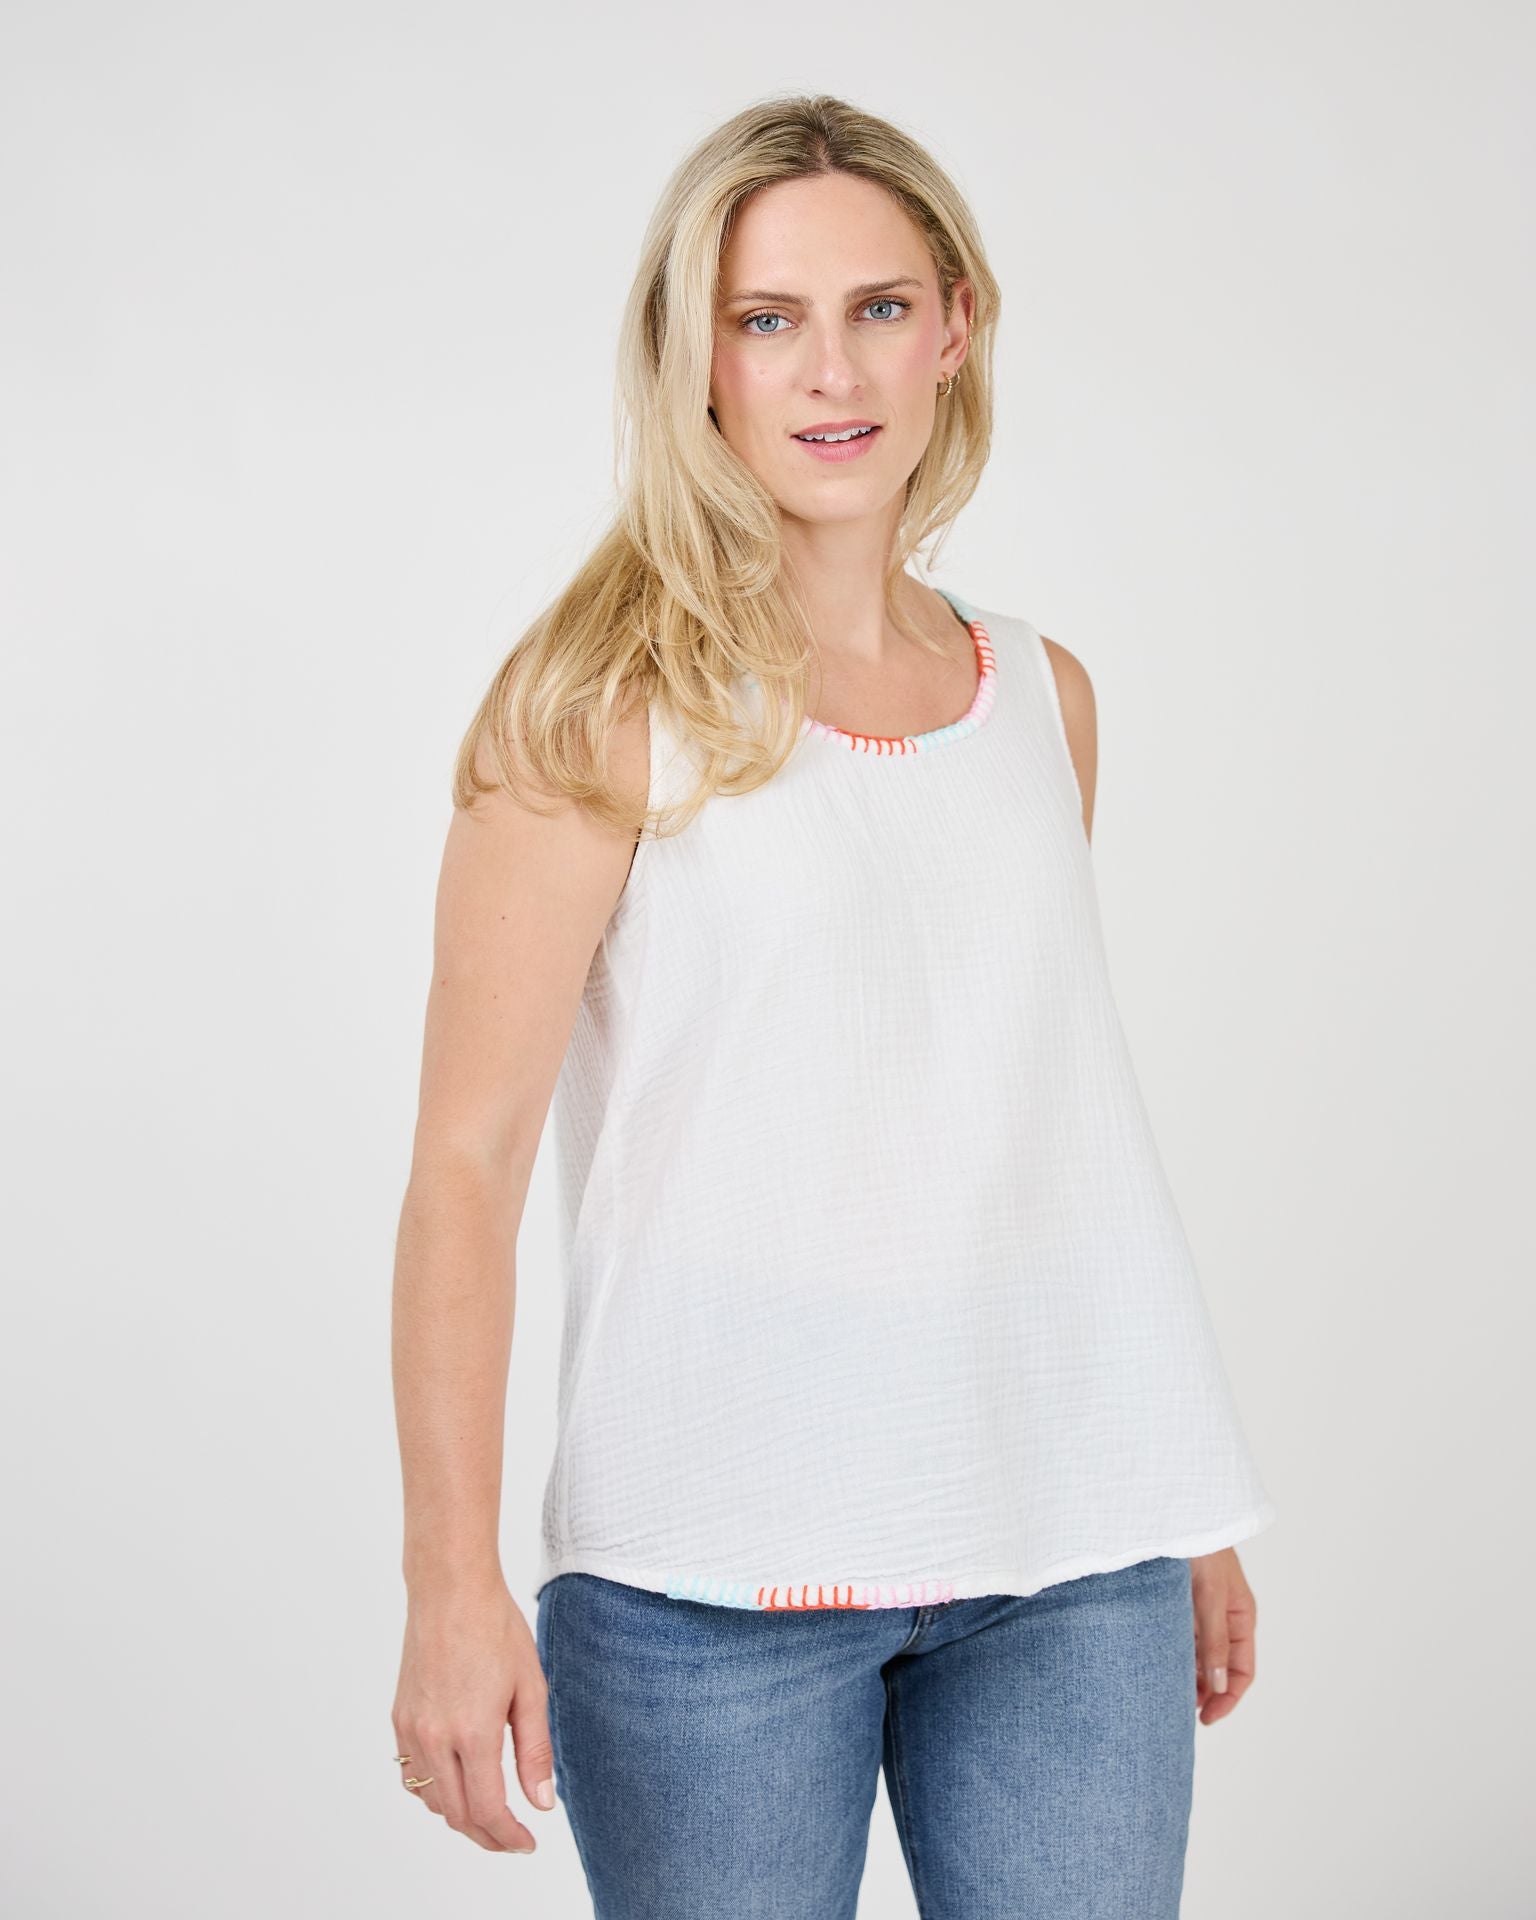 Shannon Passero - Georgie Tank Top - all things being eco chilliwack